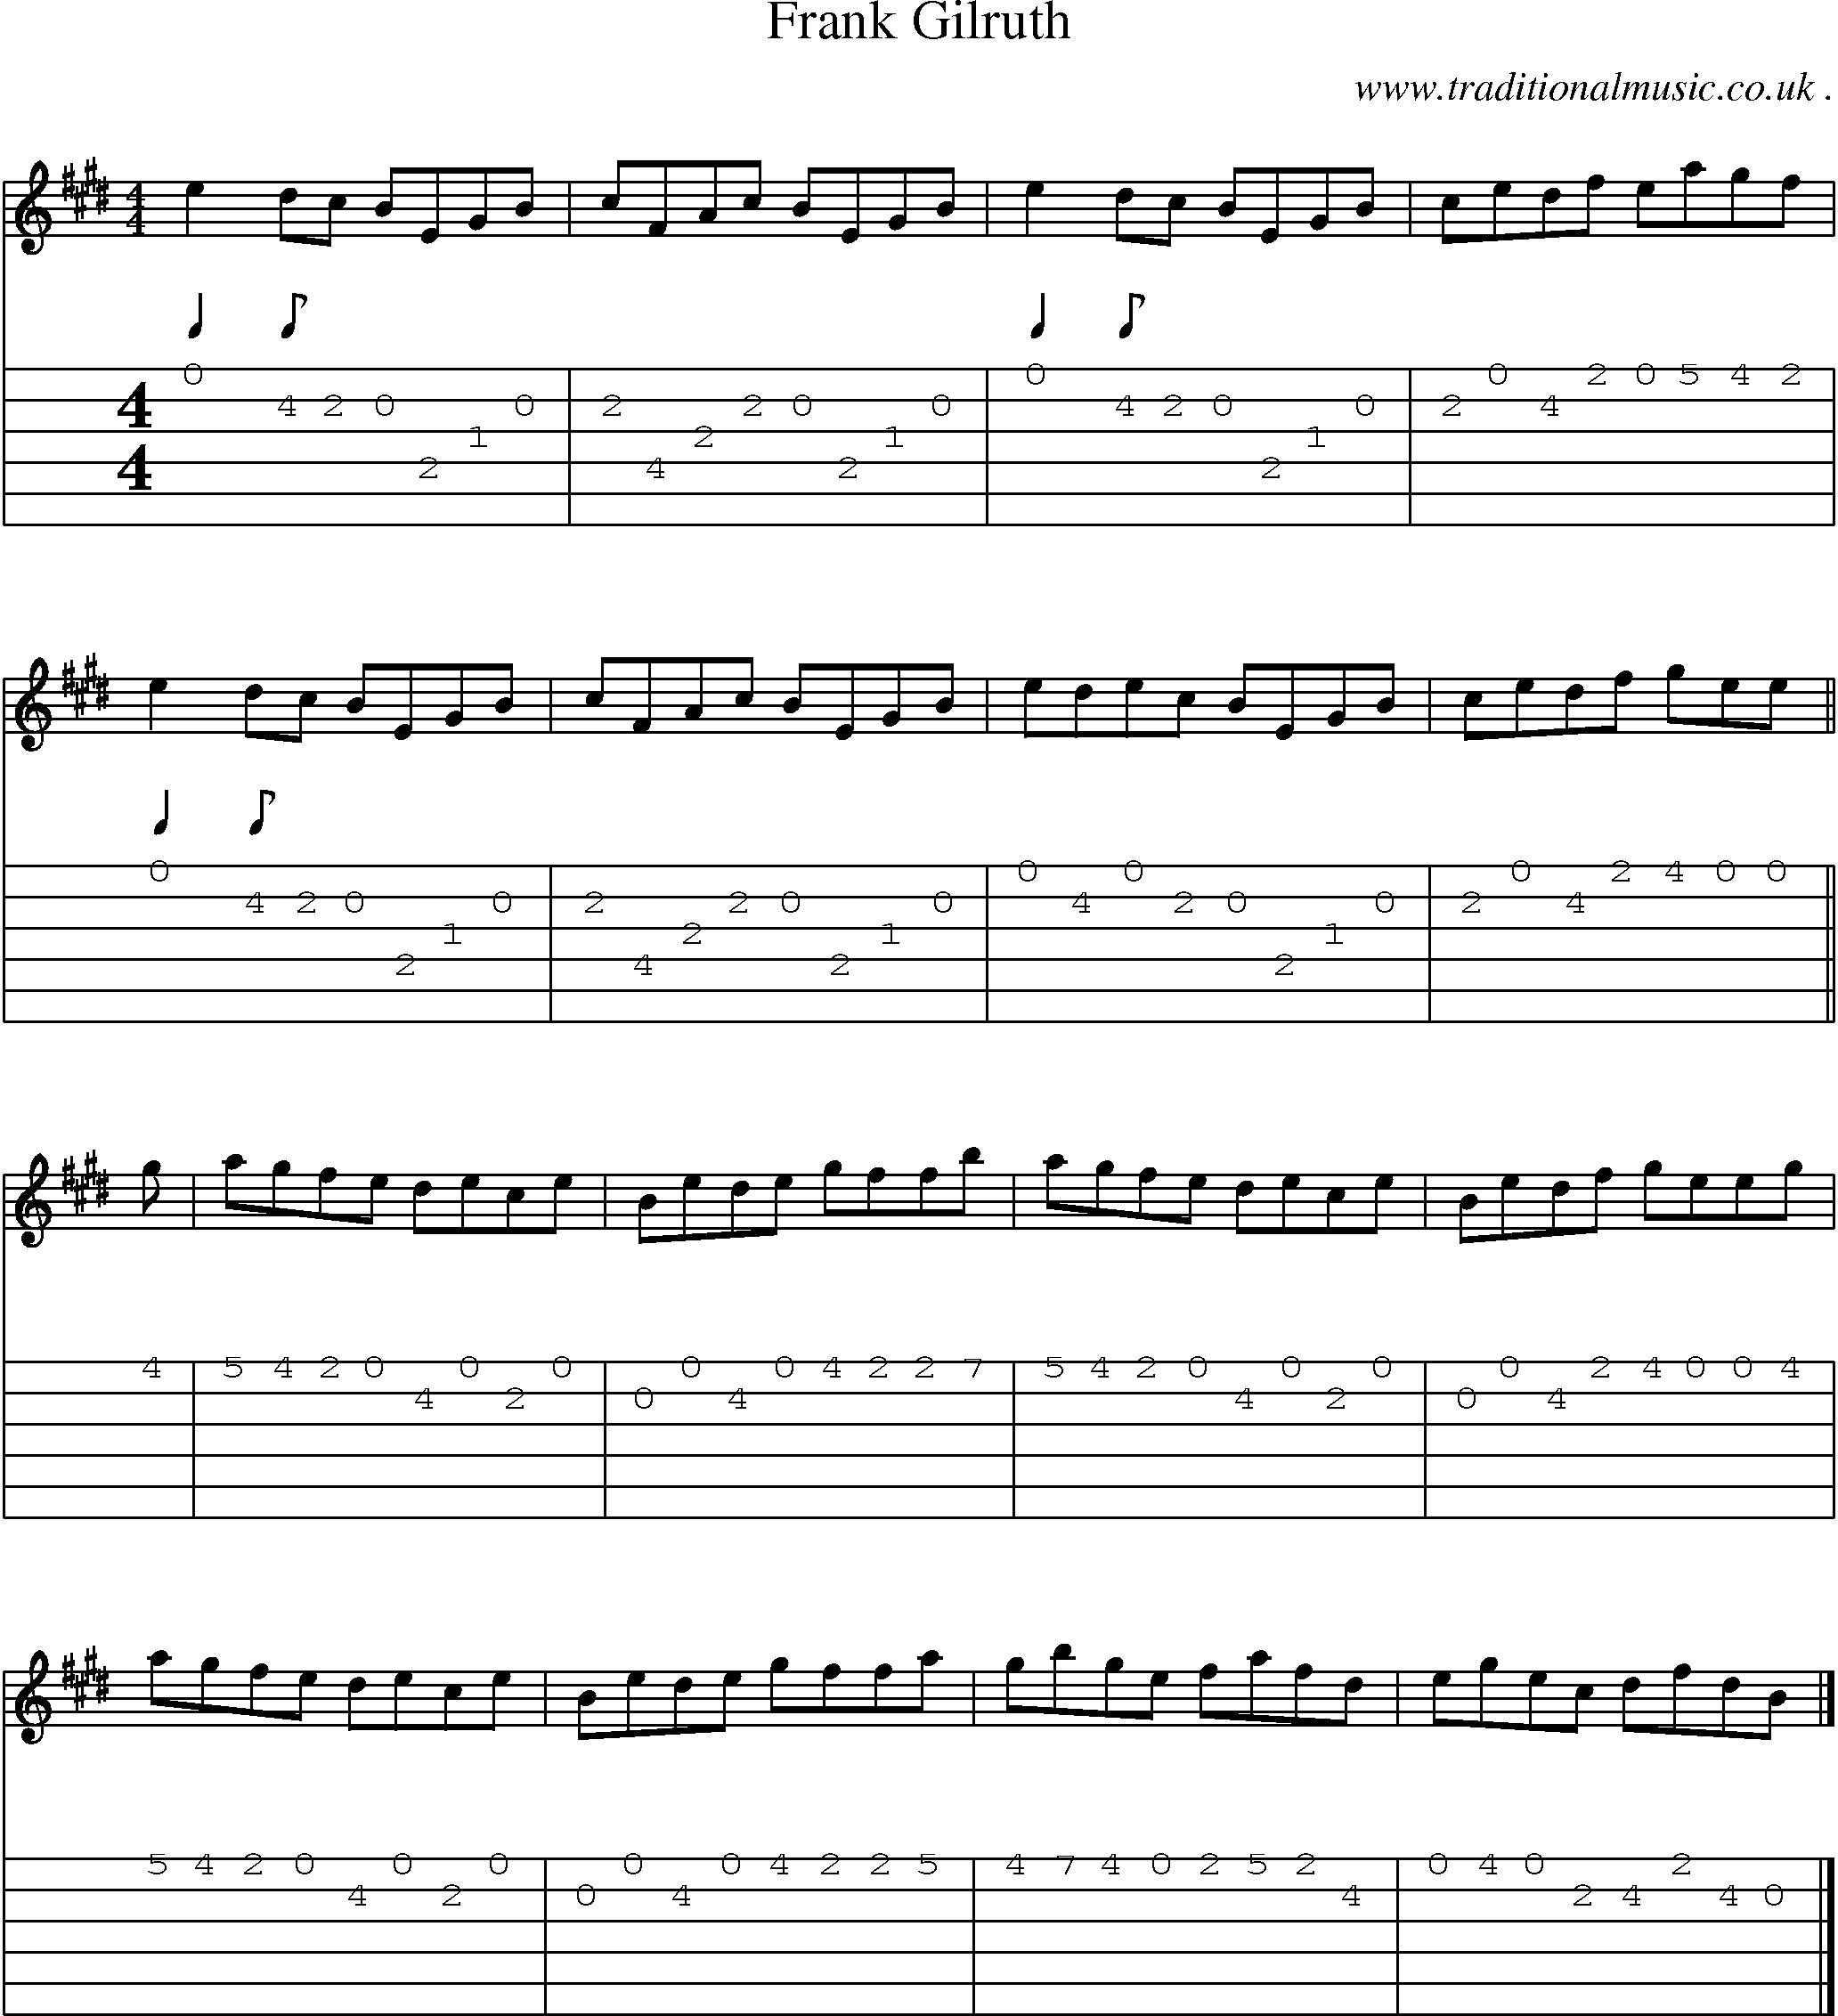 Sheet-music  score, Chords and Guitar Tabs for Frank Gilruth